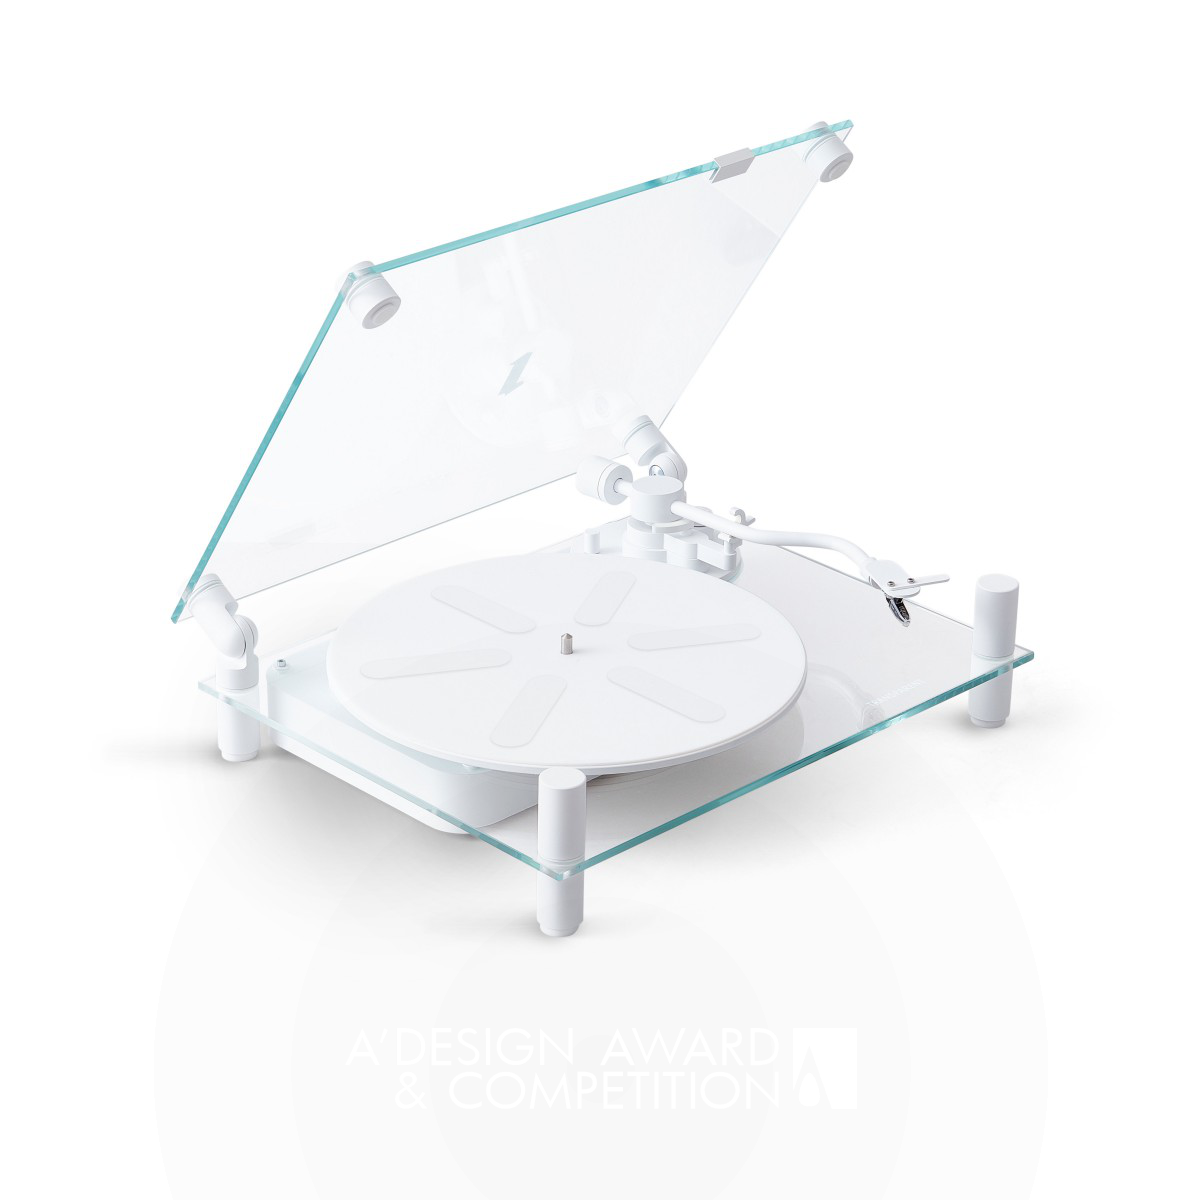 Transparent Turntable Wireless Vinyl Record Player by Martin Willers